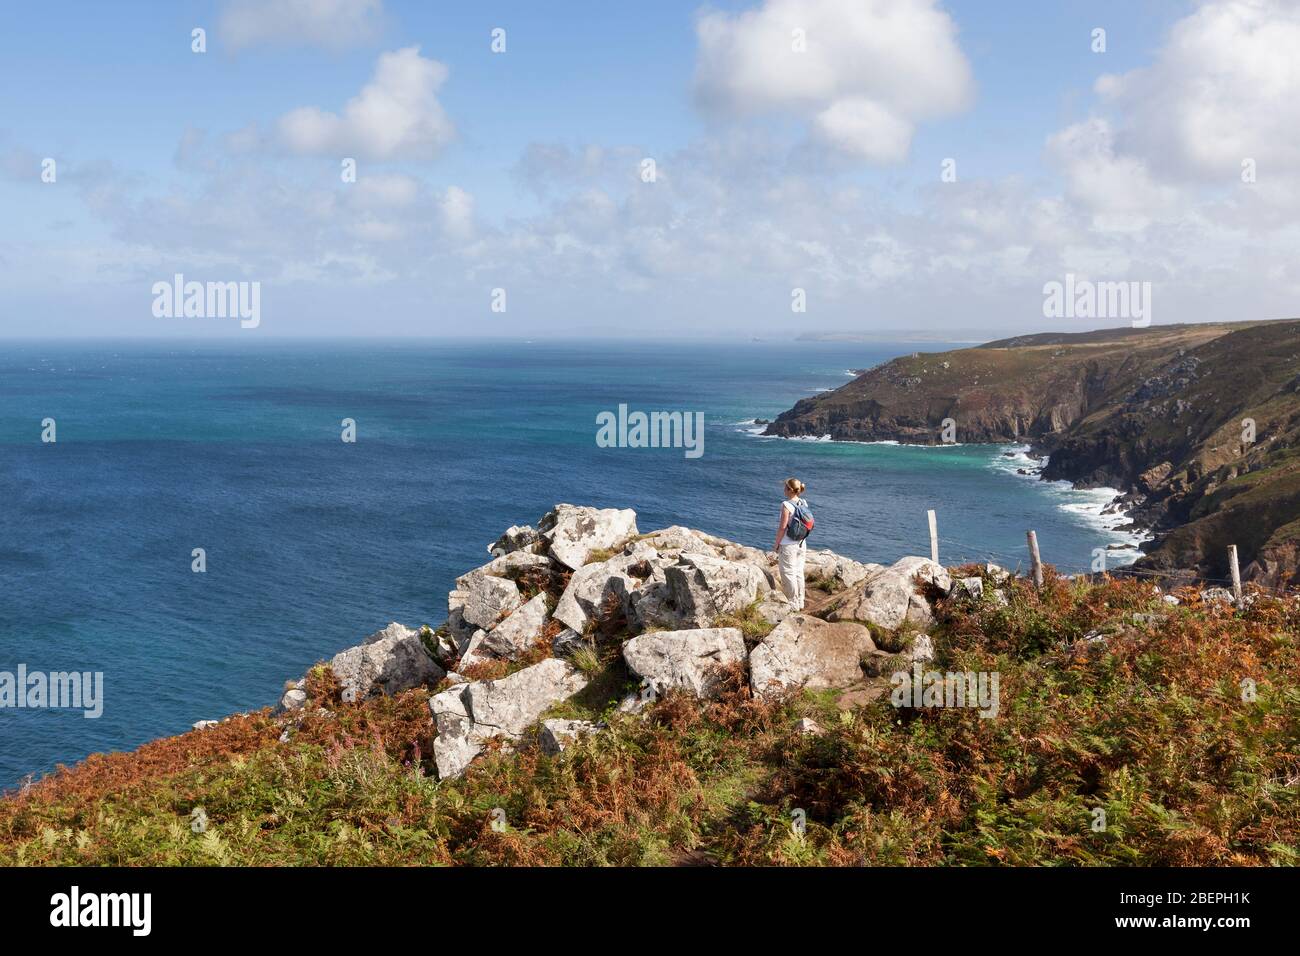 Woman standing on a rocky clifftop looking at the stunning coastal scenery near St Ives in Cornwall, England, UK Stock Photo